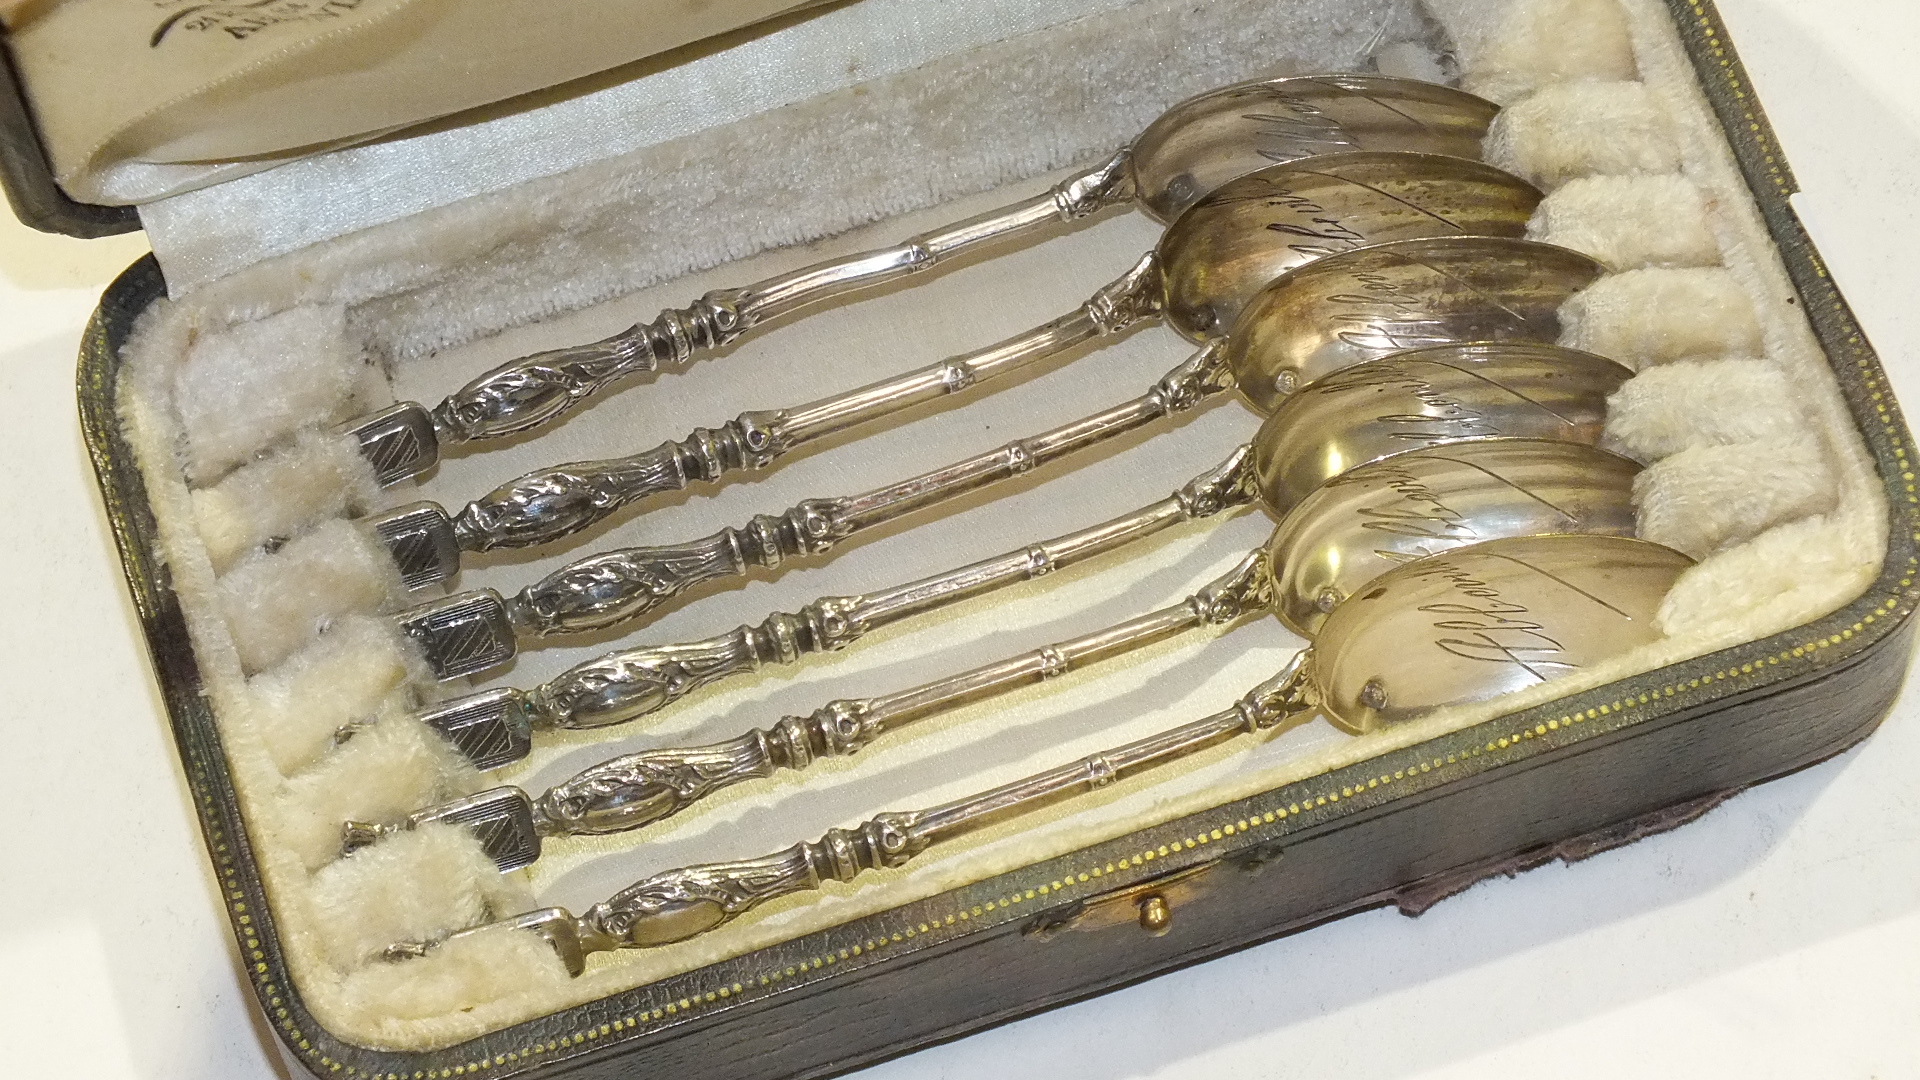 A cased set of six French silver teaspoons, each with crown and coat of arms finial and inscribed "